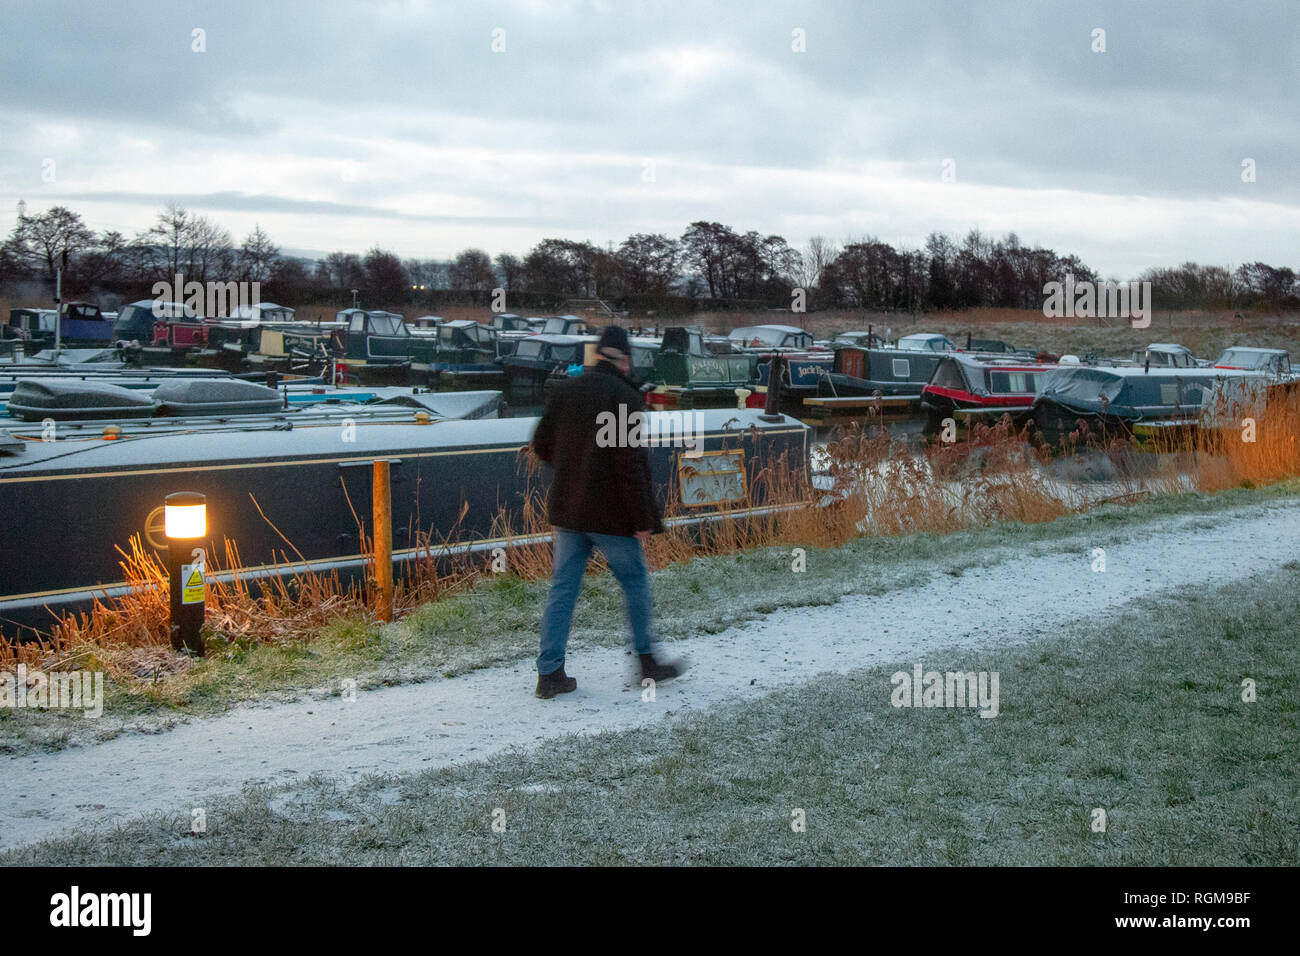 Rufford, Lancashire. 30th Jan, 2019. UK Weather. Cold, frosty, with light snow showers. The Met Office has issued a yellow weather warning across the majority of the UK as the area is braced for more snow and ice. Credit. Media WorldImages/AlamyLiveNews. Stock Photo